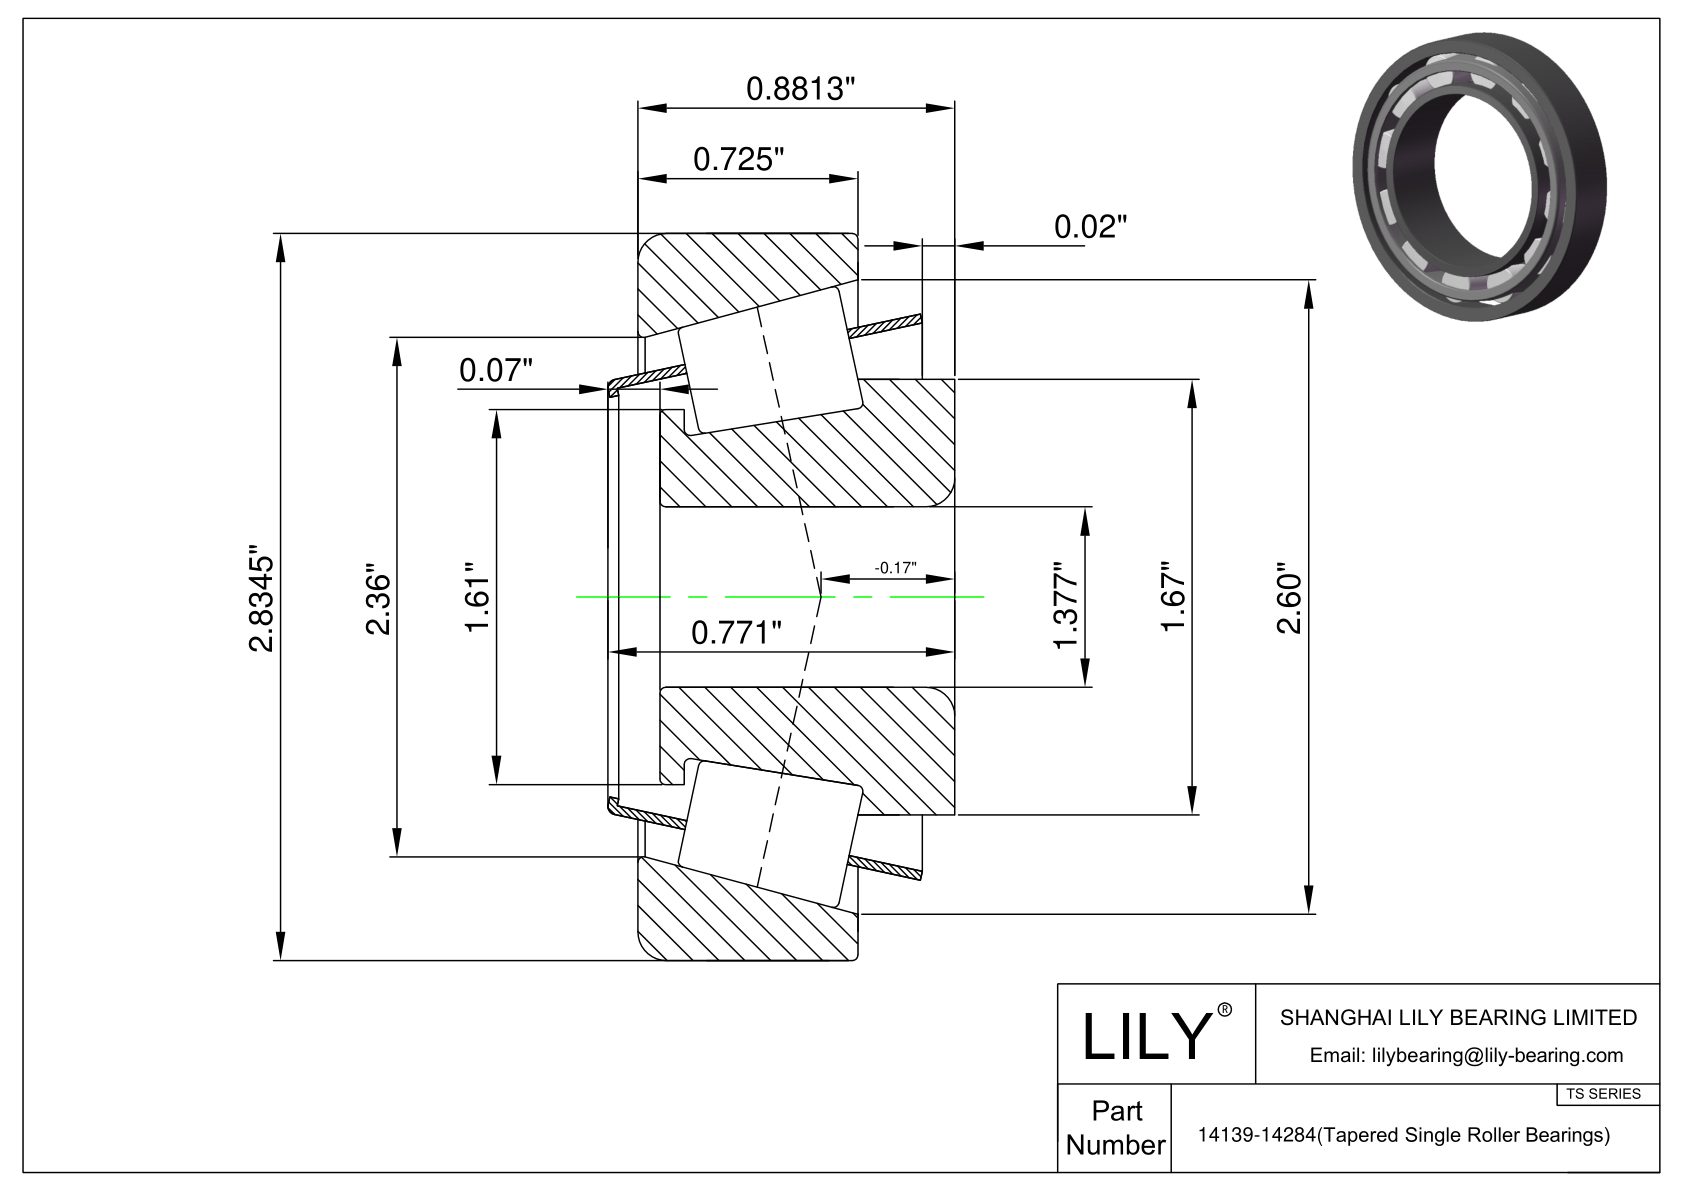 14139-14284 TS (Tapered Single Roller Bearings) (Imperial) cad drawing